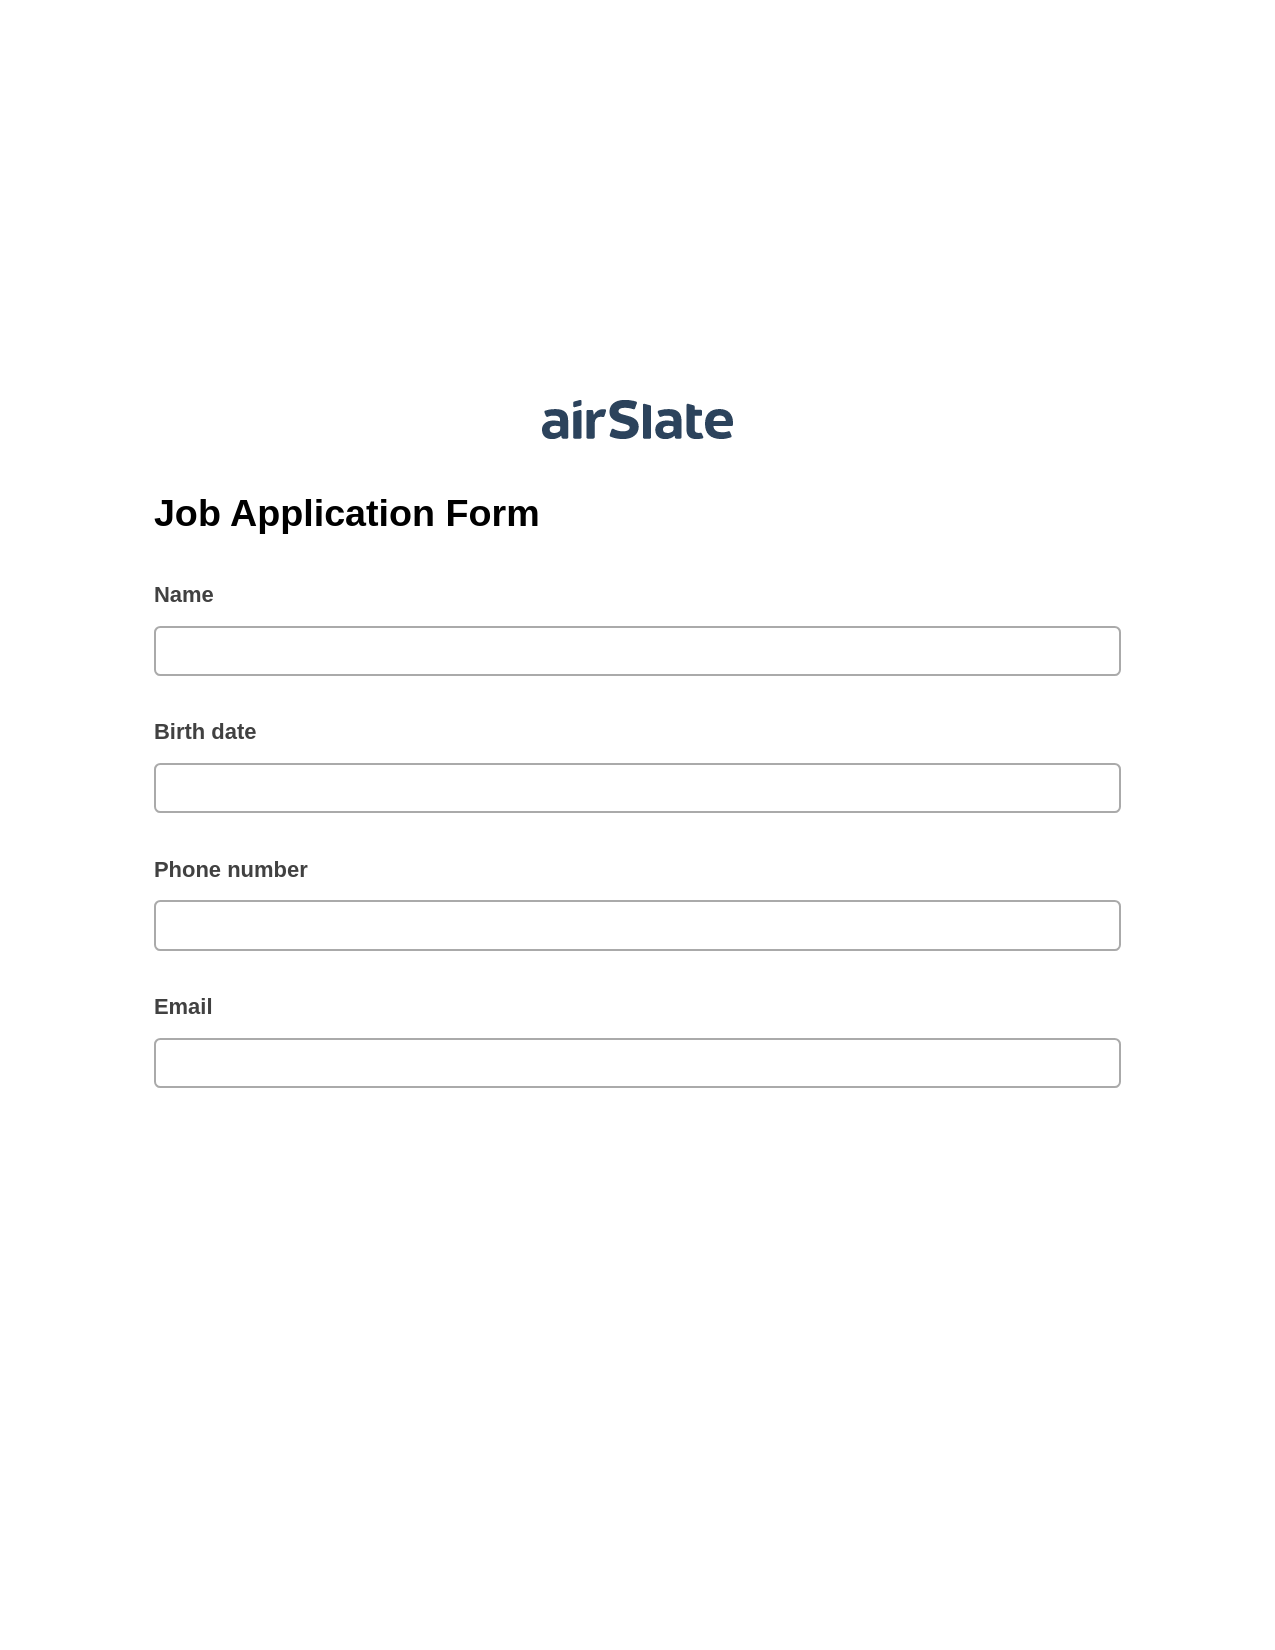 Job Application Form Pre-fill Document Bot, Export to MS Dynamics 365 Bot, Export to Formstack Documents Bot